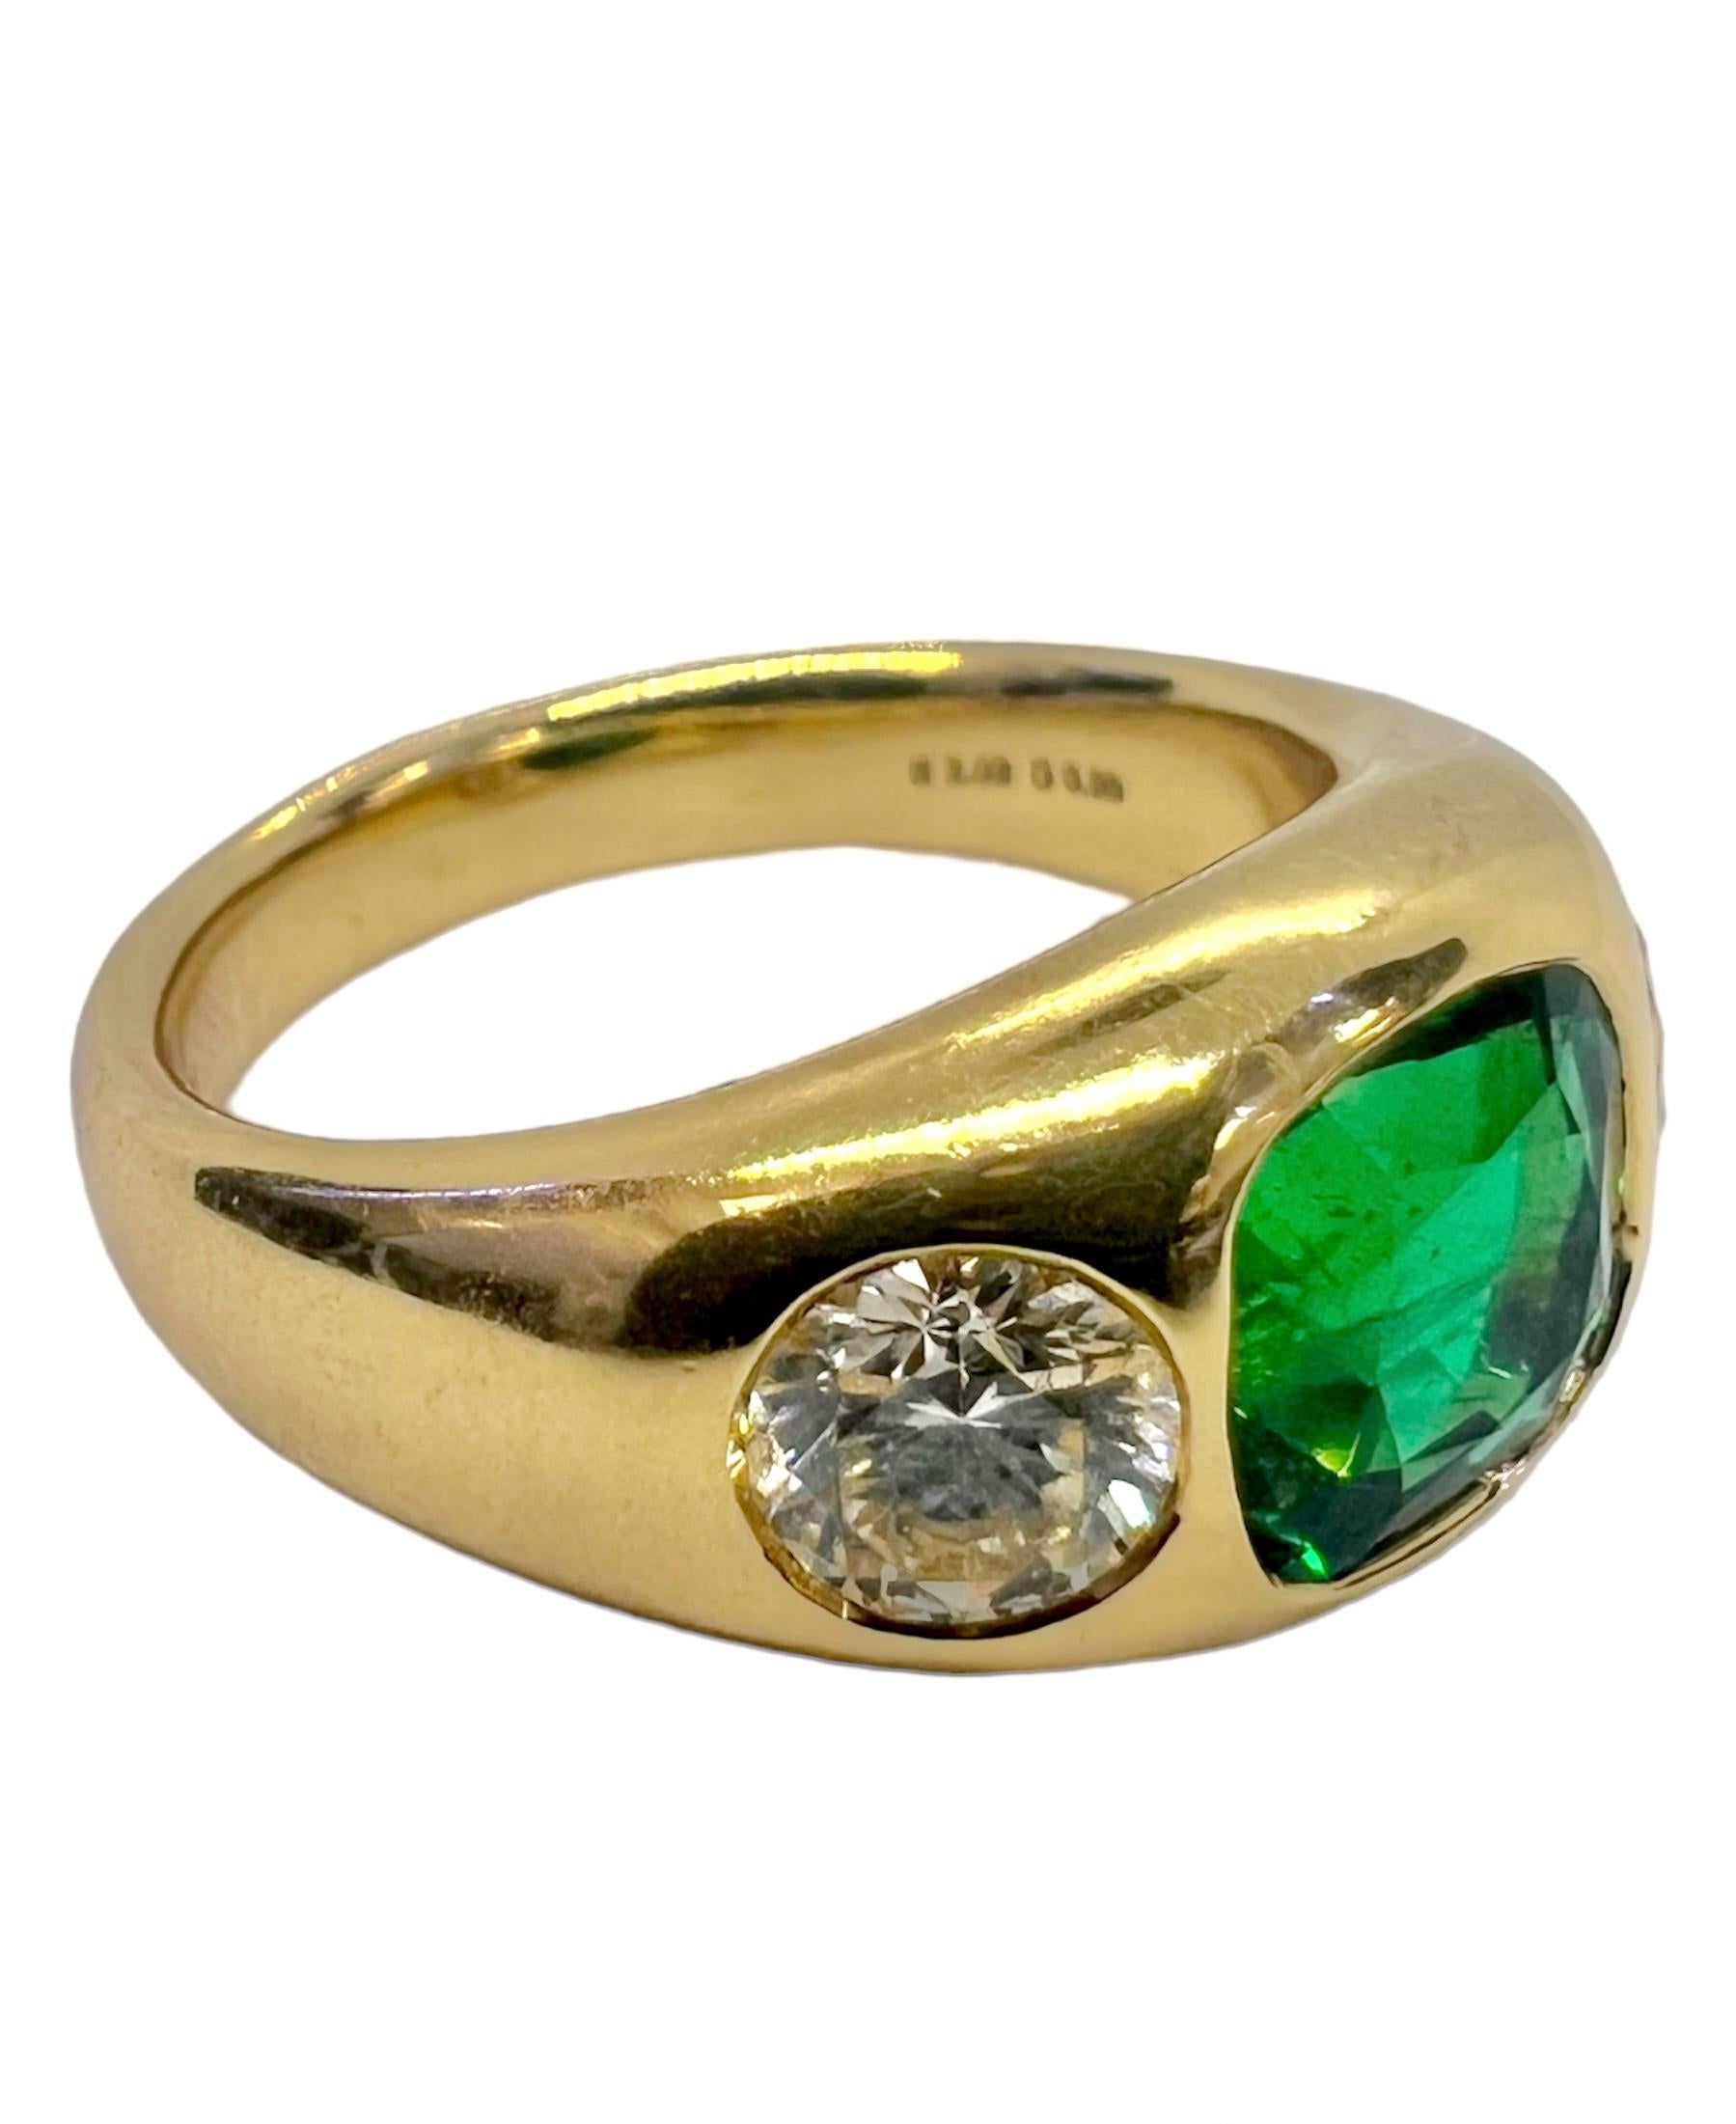 Gypsy ring set in 18K yellow gold that features a 2.02 carat cushion cut green emerald and .49 carat and .50 carat round diamonds.

Sophia D by Joseph Dardashti LTD has been known worldwide for 35 years and are inspired by classic Art Deco design